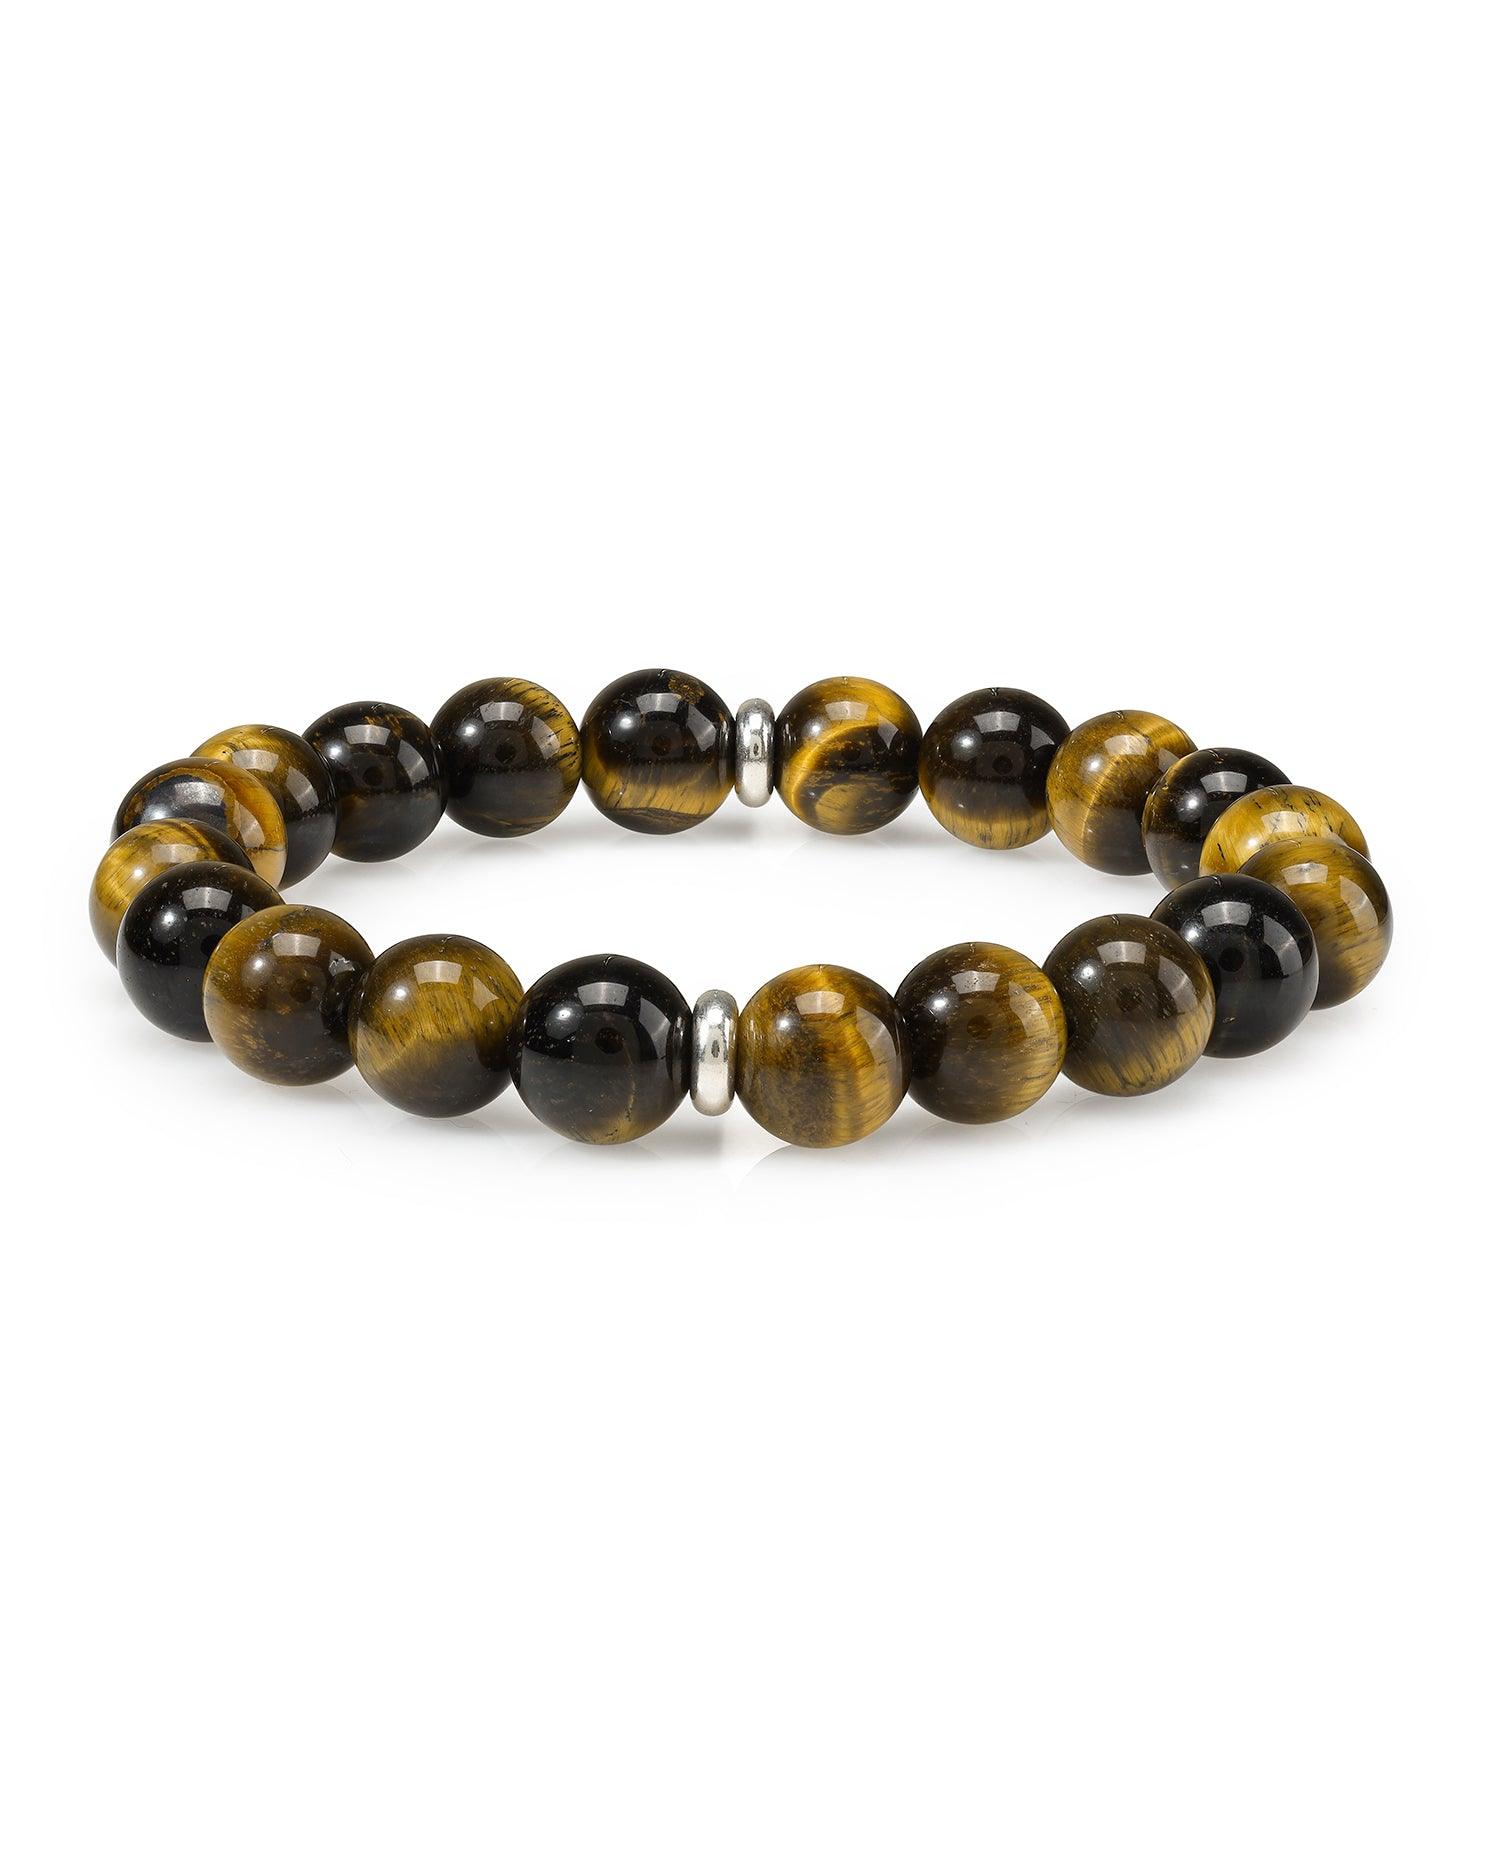 Tiger Eye Solid 925 Sterling Silver Charm Stretchable Beaded Bracelet For Men's Jewelry - YoTreasure